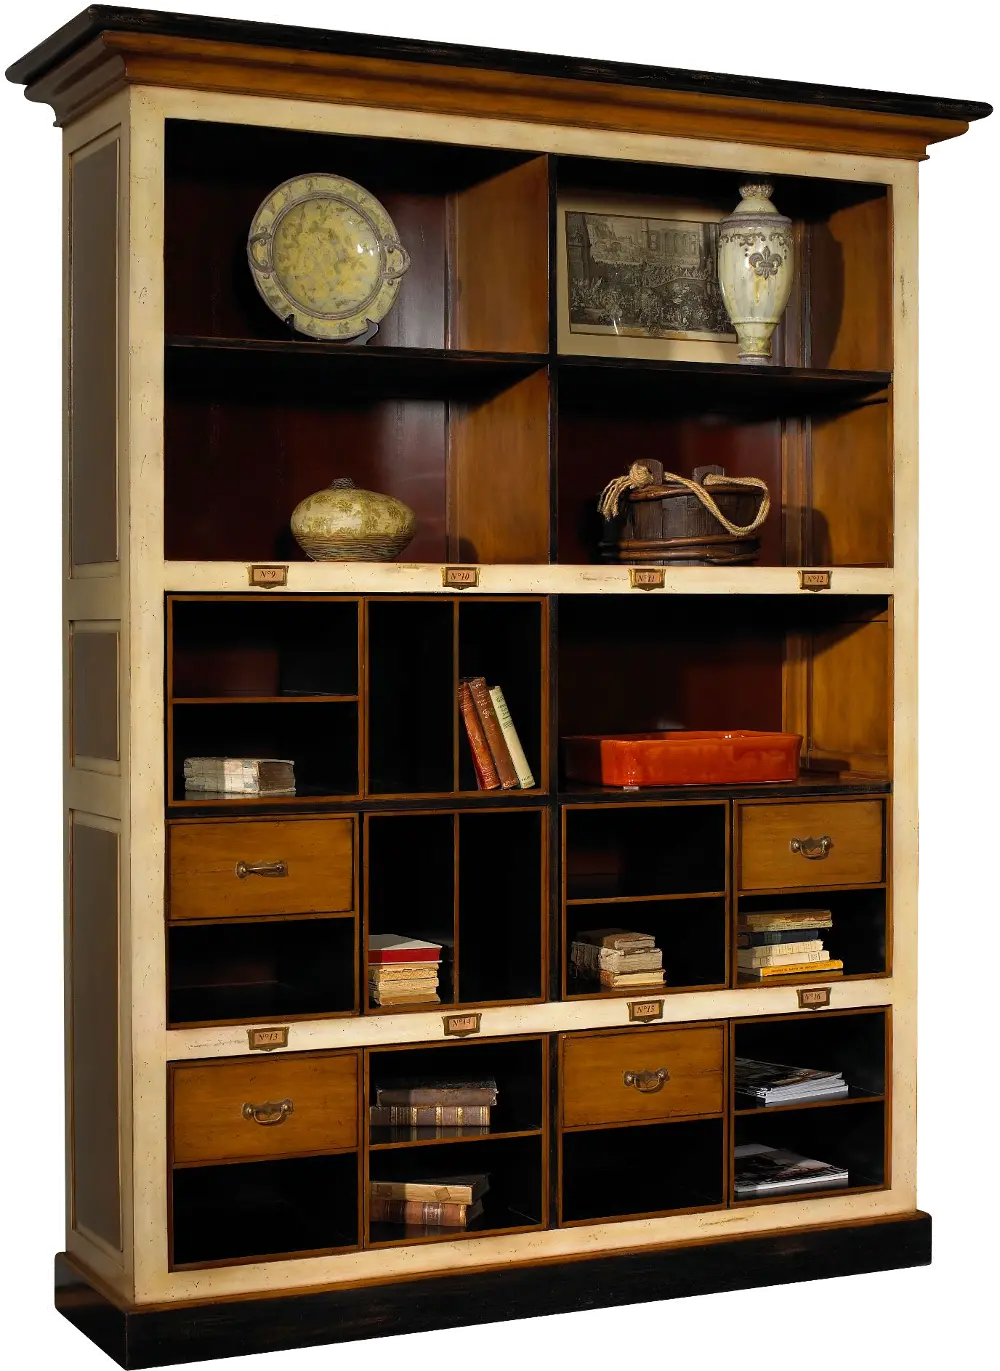 Beige, Black and Light Cherry Bookcase - Archivists-1